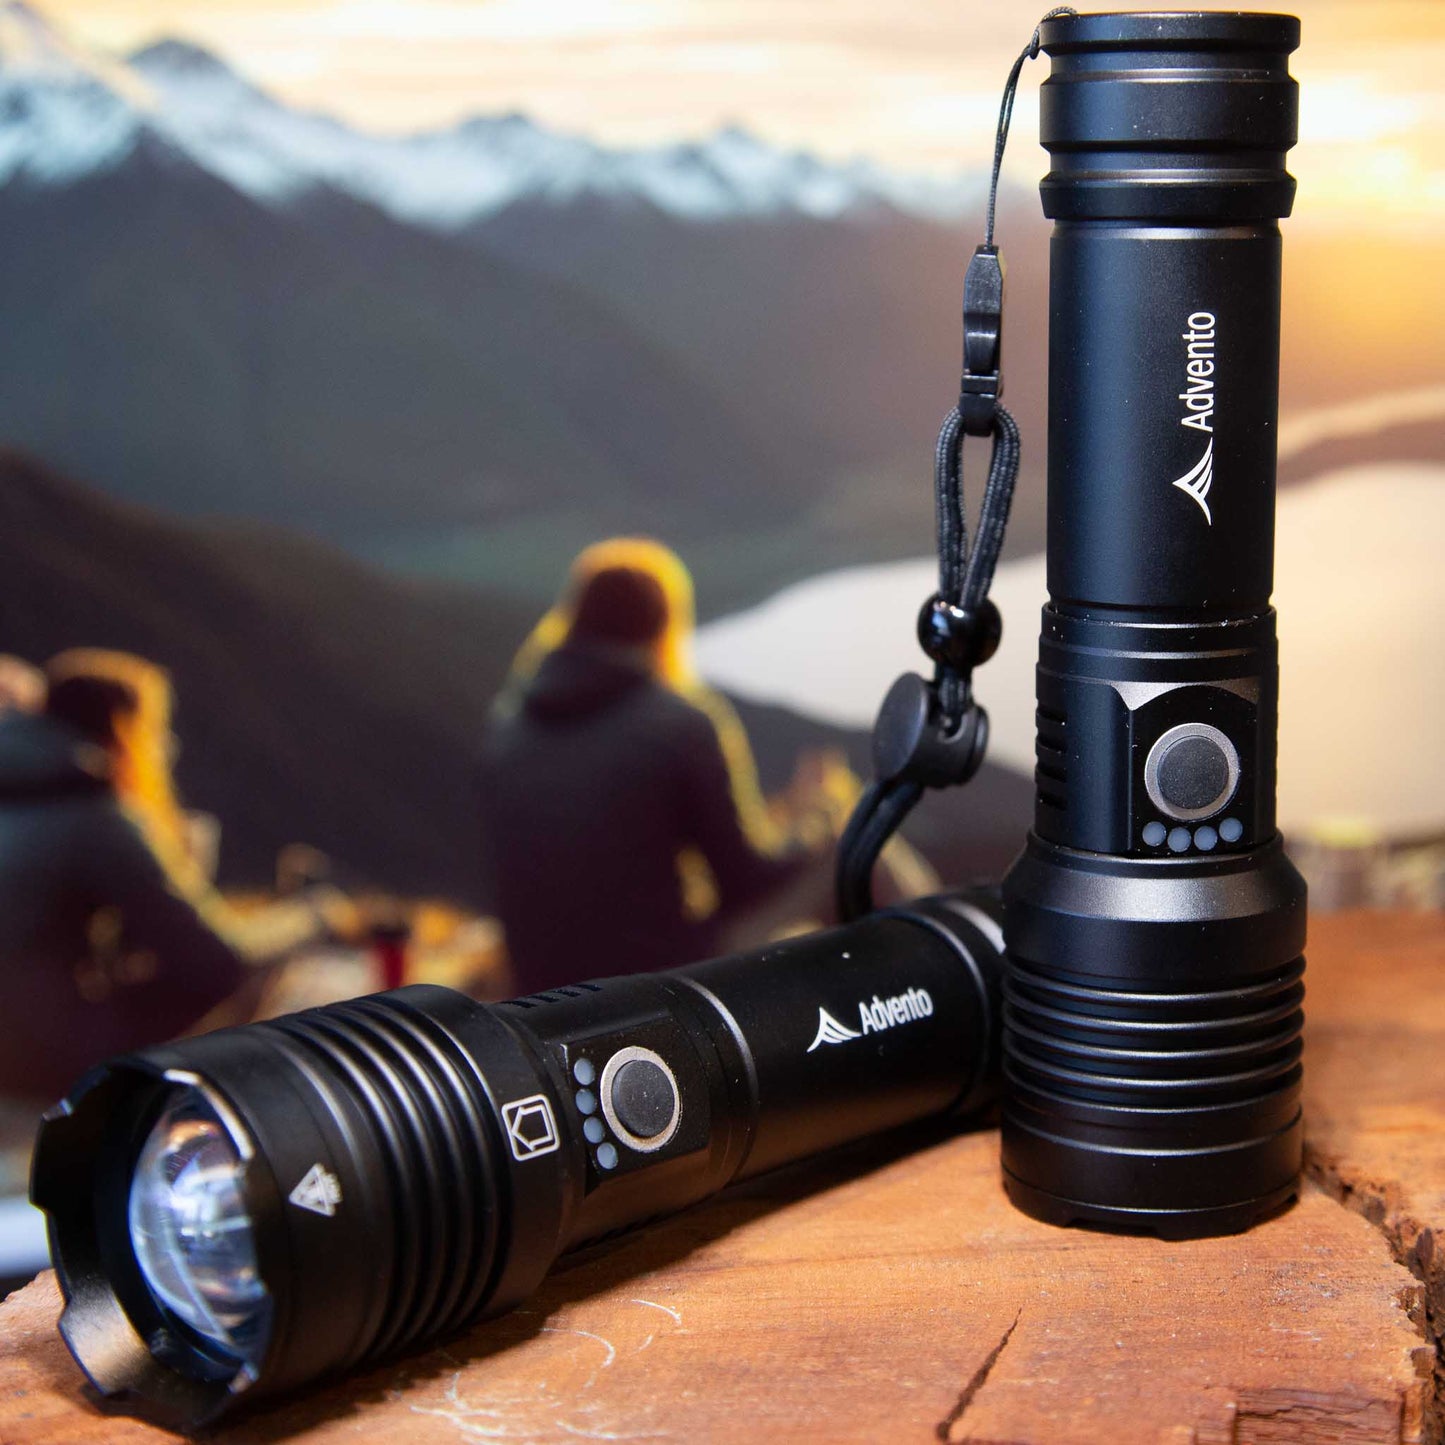 xhp50 Rechargeable powerful flashlight With 5 Light Modes